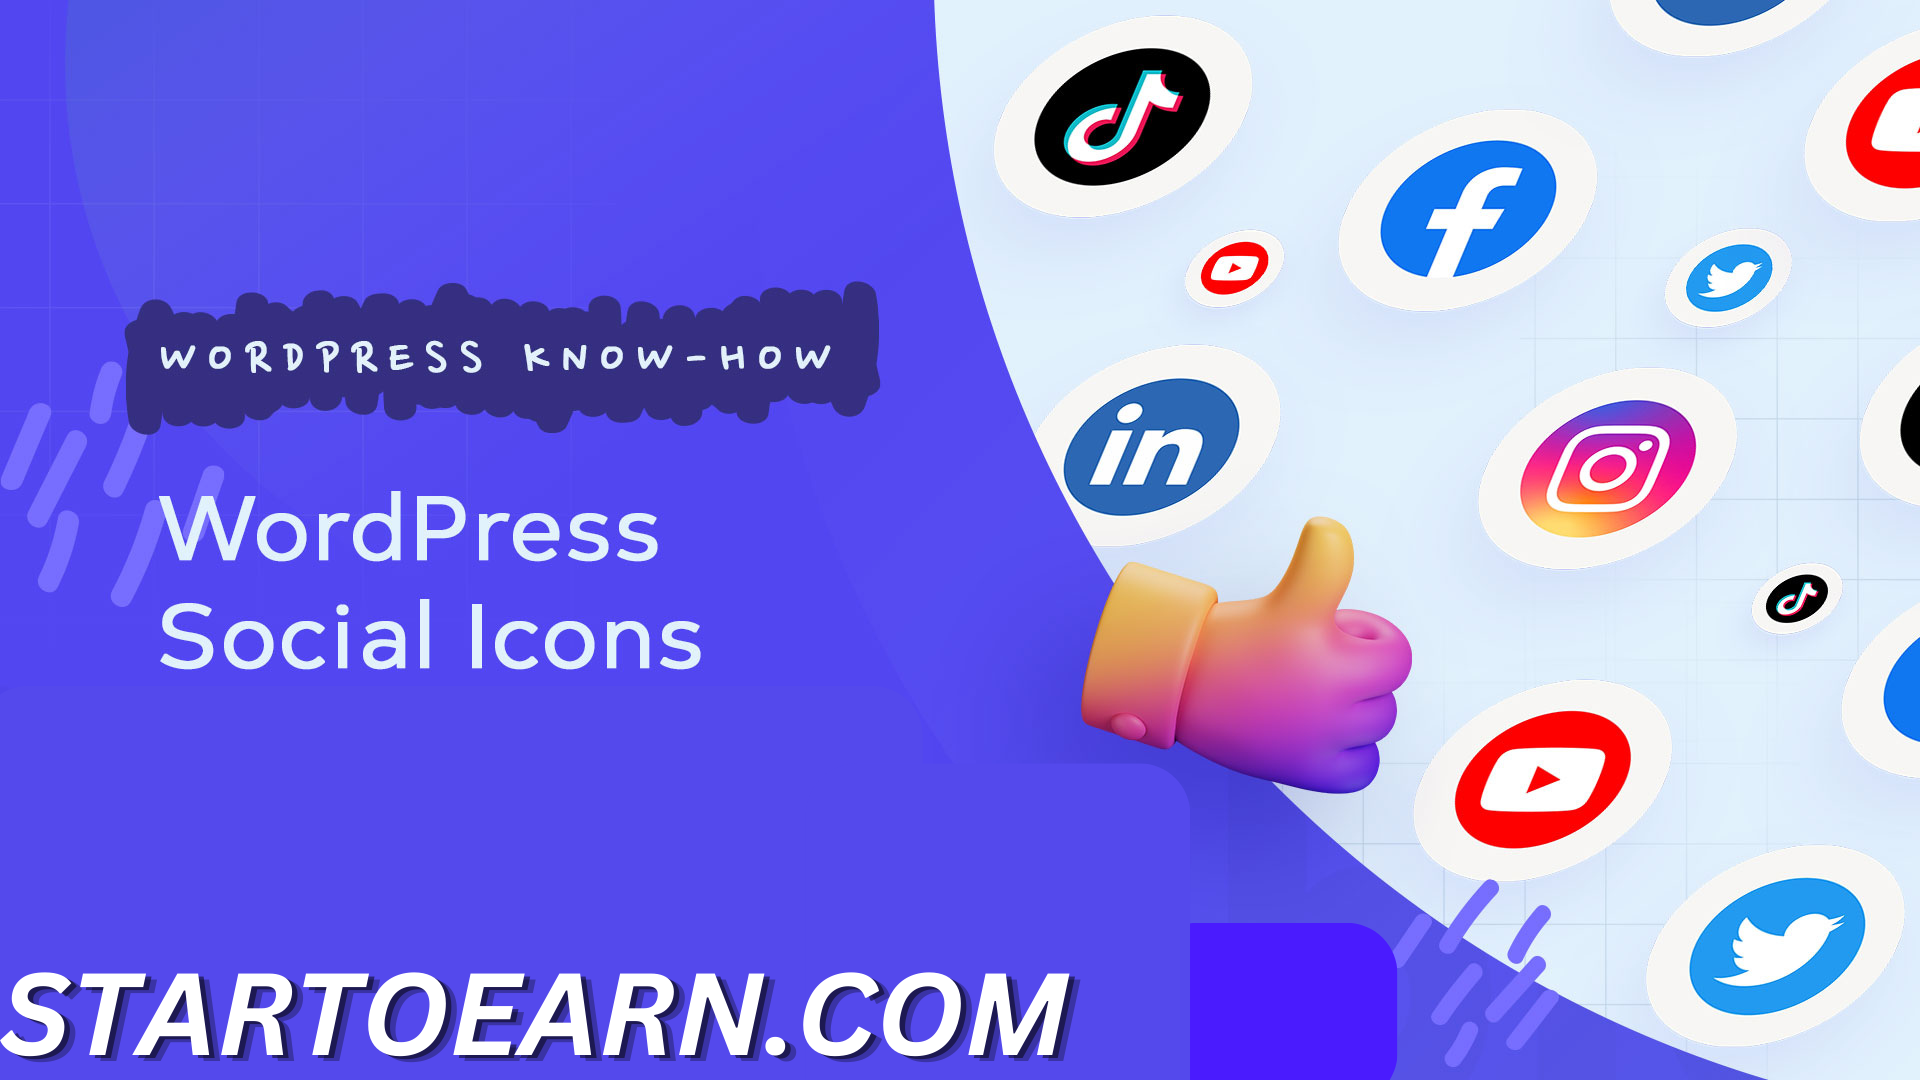 Reach With Eye-catching Social Icons